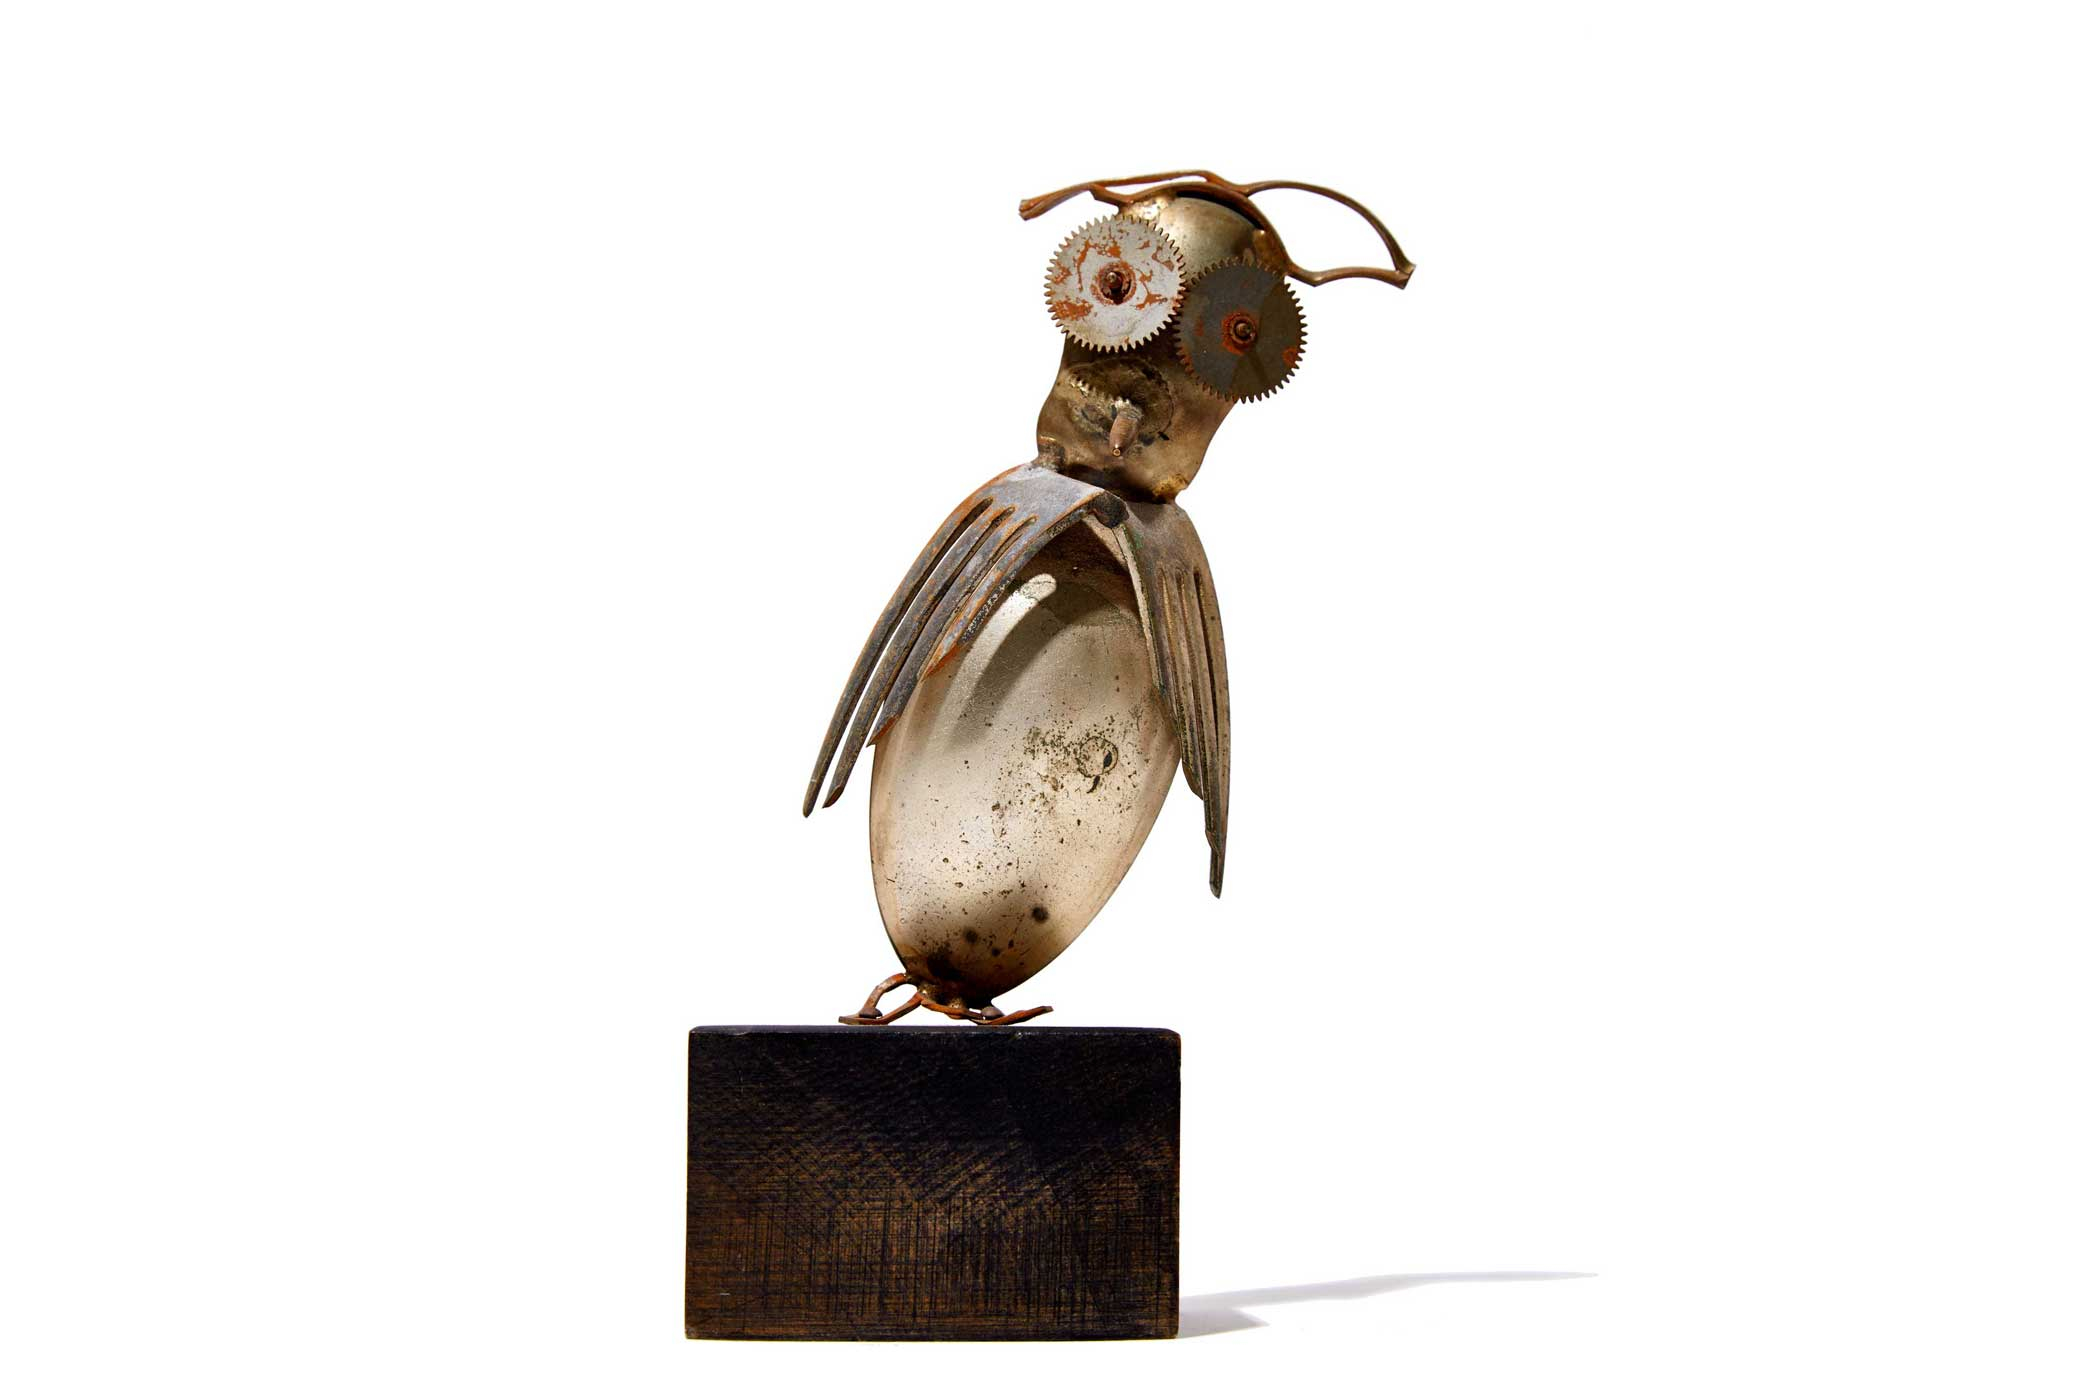 8. Danny Meyer’s Desk owl
                              “This was always on my dad’s desk, and he and I cooked together when I was a kid,” says the restaurateur. “Even though he’s not here, I still love him deeply.”